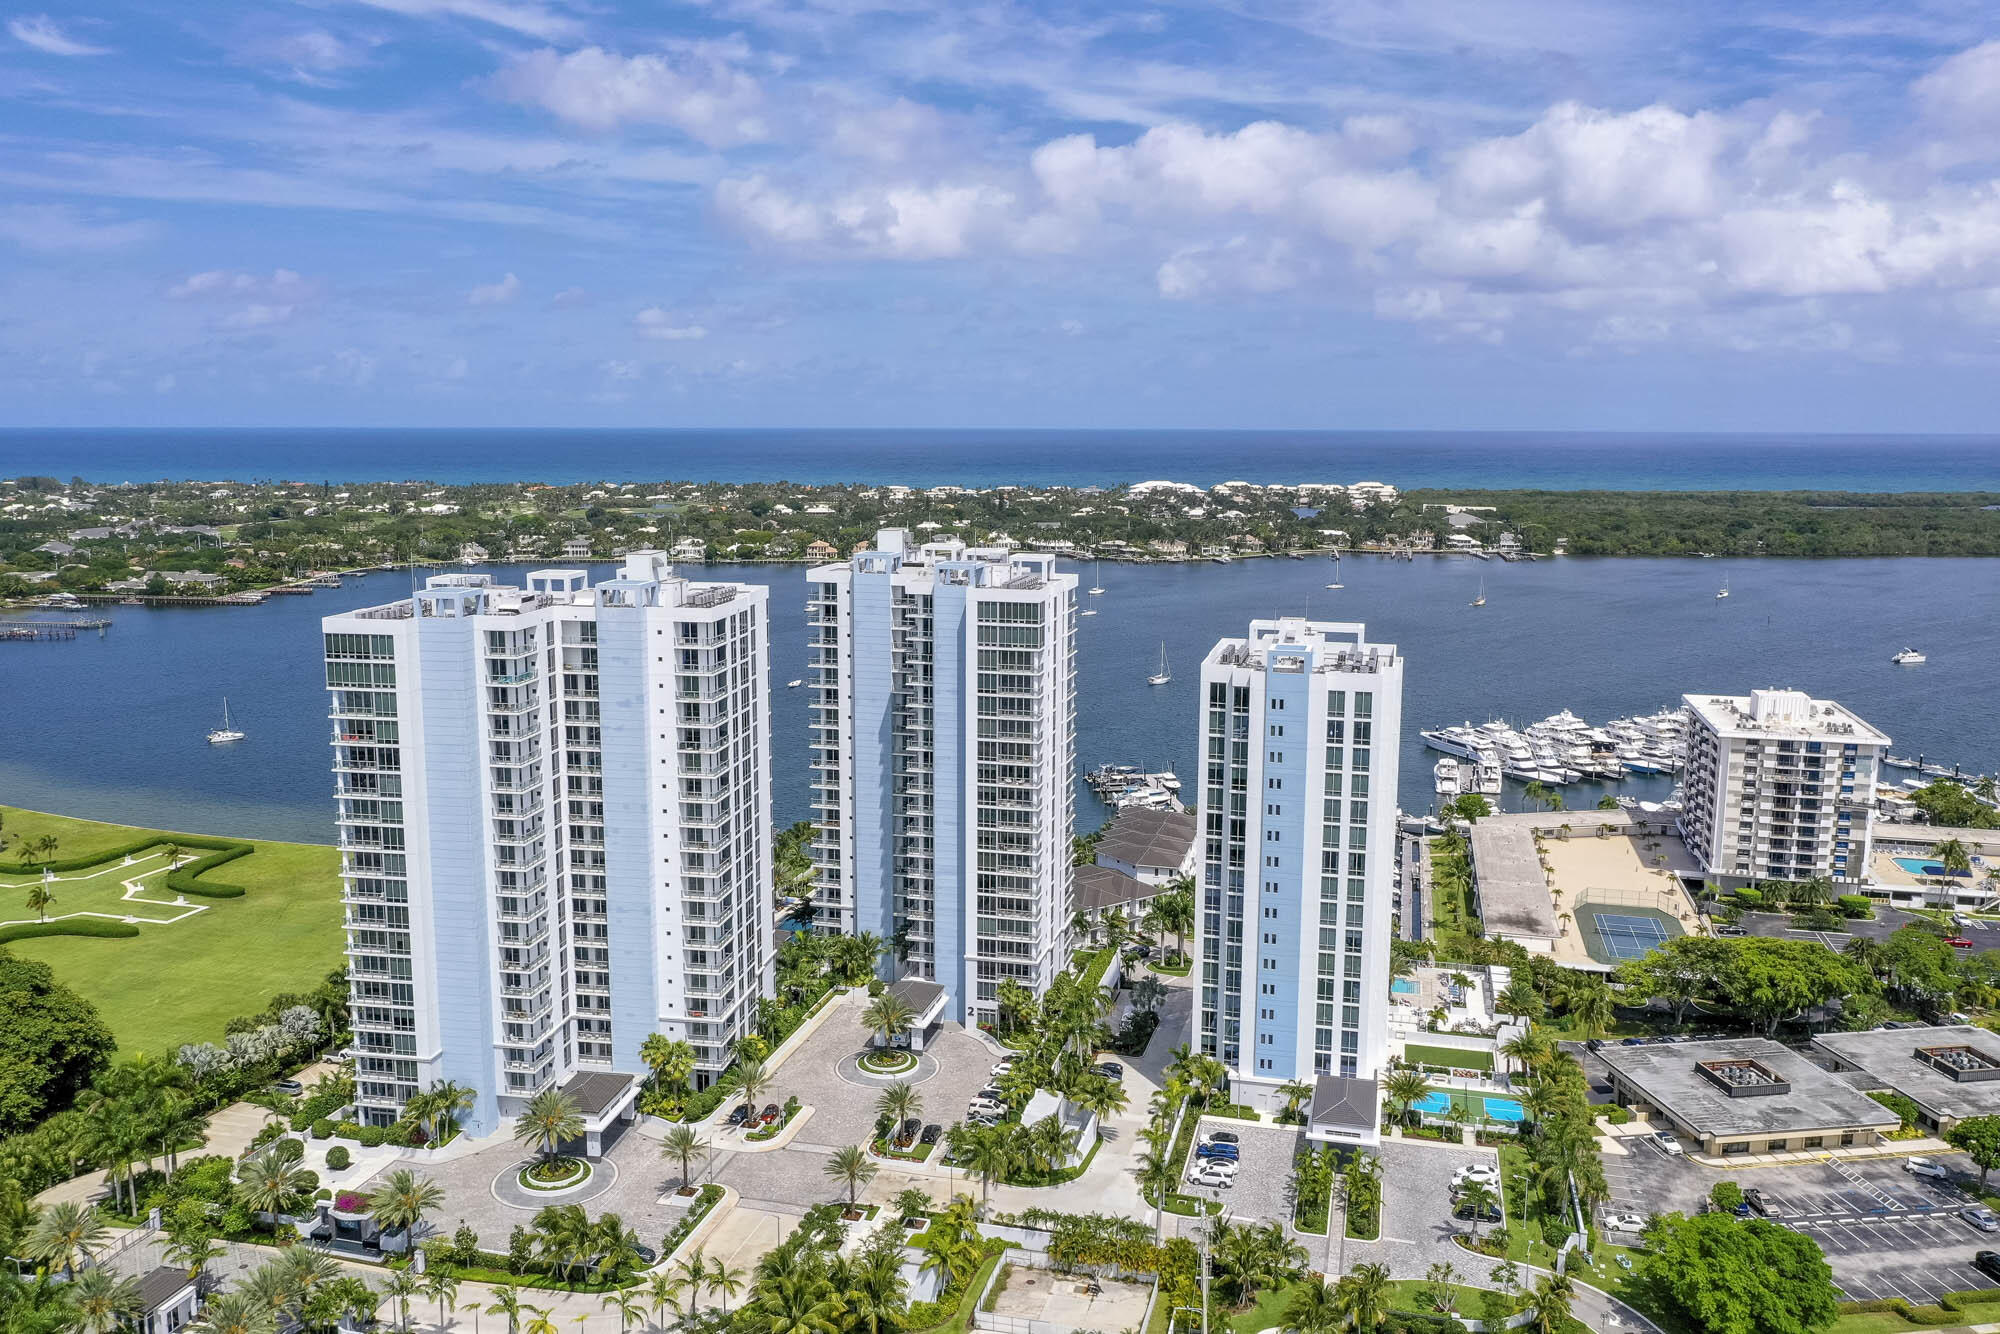 This Elegant Cobalt model located in the exclusive South tower of Water Club boasts breathtaking Intracoastal views, ultra-high-end interior finishes, resort style amenities, and private elevator access. The unique 2BR/2.5BA unit also features an extra balcony, perfect for enjoying stunning sunrises and making the most of the true Florida lifestyle! Inside you'll find an open concept living area with expansive water views, a stylish kitchen with European cabinetry, a waterfall quartz center island, and Jenn-Air appliances, plus a flex space that can be used as an office, den, or TV room. The Large primary bedroom has tons of light from the floor to ceiling sliding doors, custom remote controlled privacy shades, and an expansive master closet with custom built in shelving. With such luxurious living comes even more luxurious amenities and Water Club is no different. Along with waterfront living you can enjoy a state-of-the-art fitness center, resort style swimming pool, a fitness pool, spa, sun decks, a club room, and dog park. Also available are day docks, a small craft dock for kayaks and canoes, a man-made beach with loungers, and a relaxing area inclusive of fire pits perfect for enjoying a cocktail or two while getting to know the neighbors.